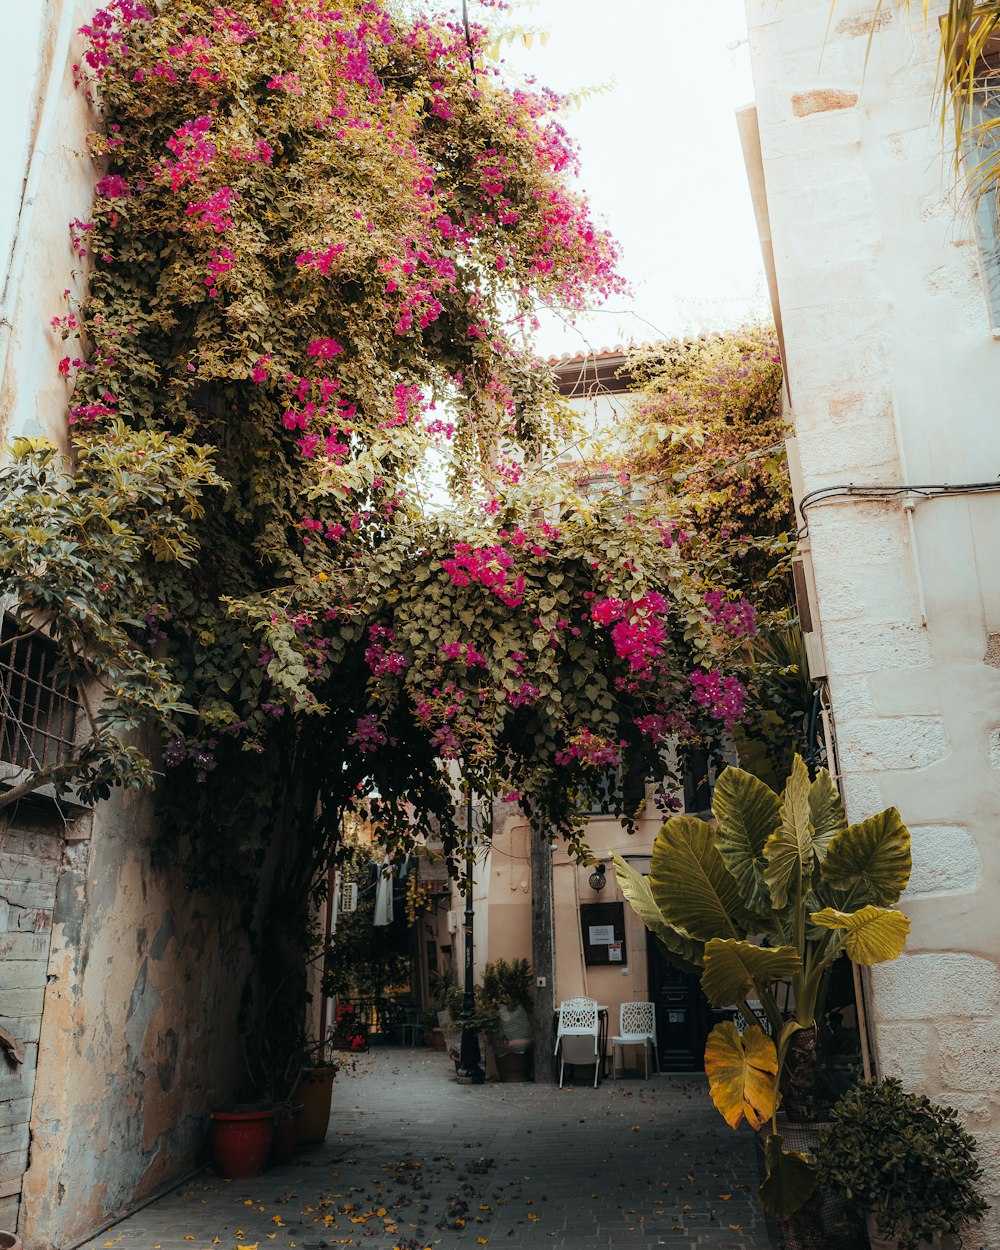 a narrow alley way with pink flowers on the trees